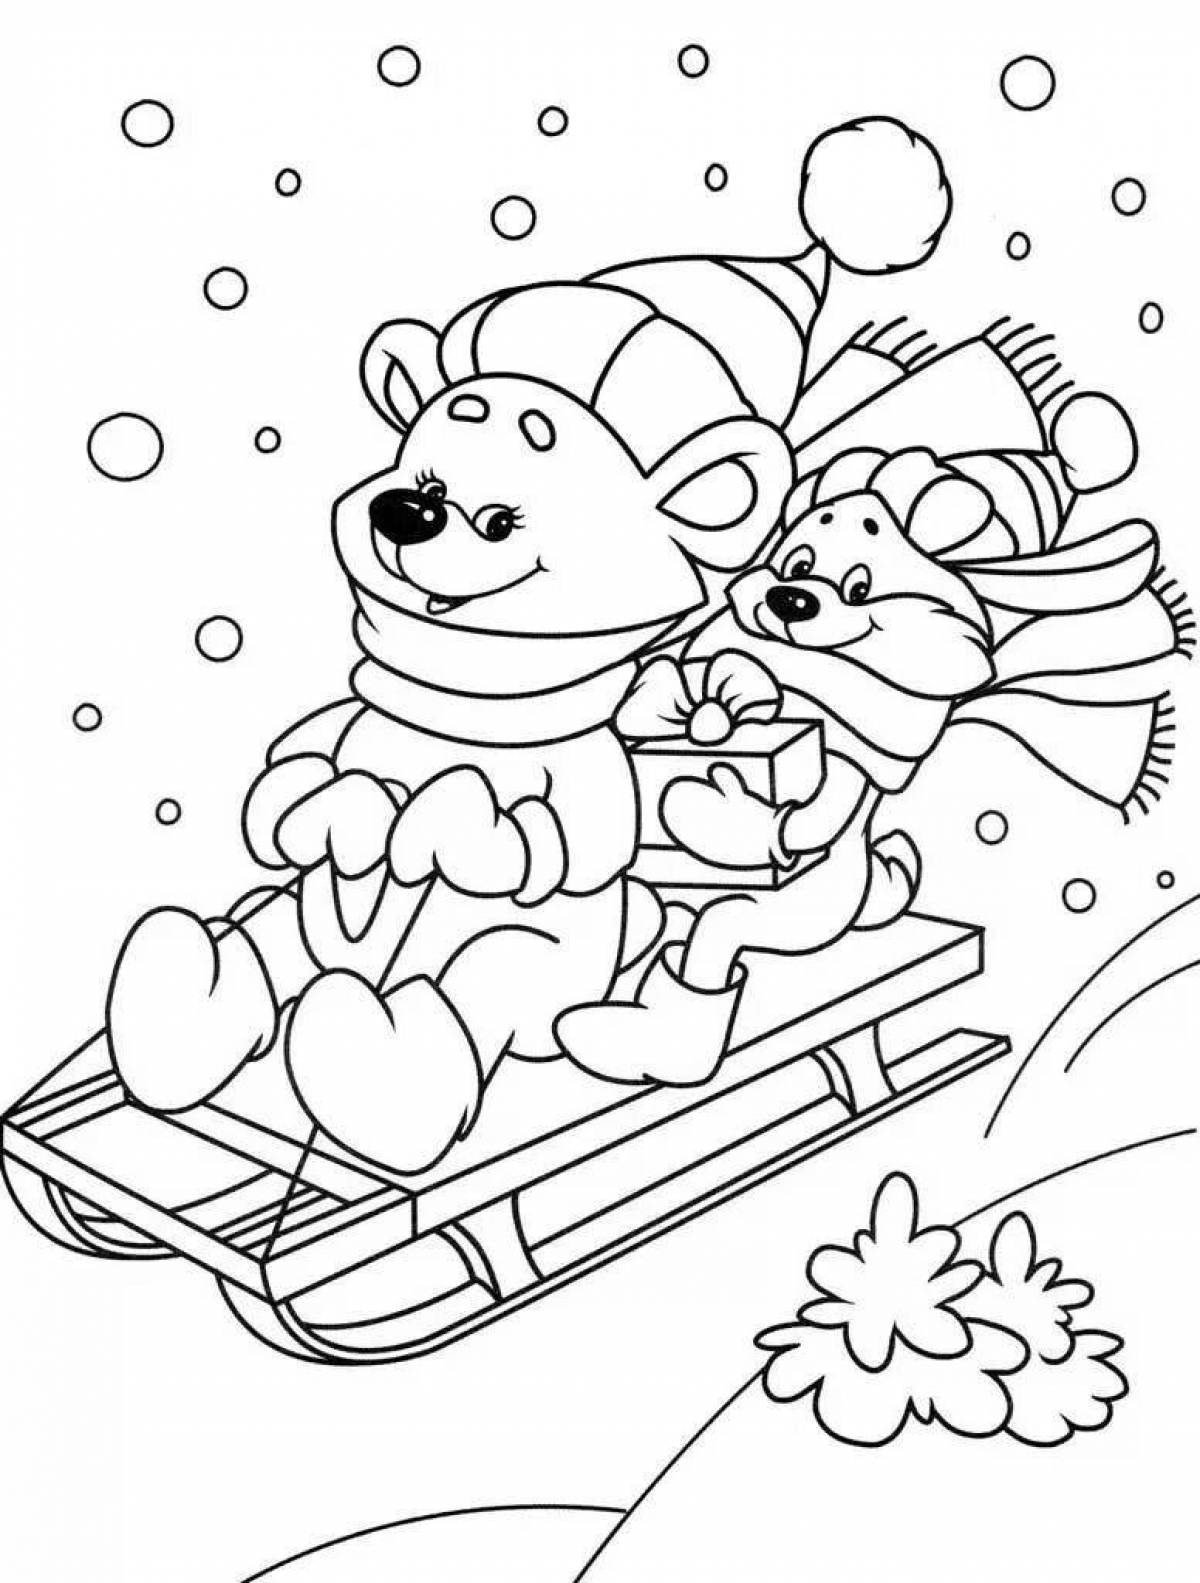 Violent winter coloring for children 3-4 years old